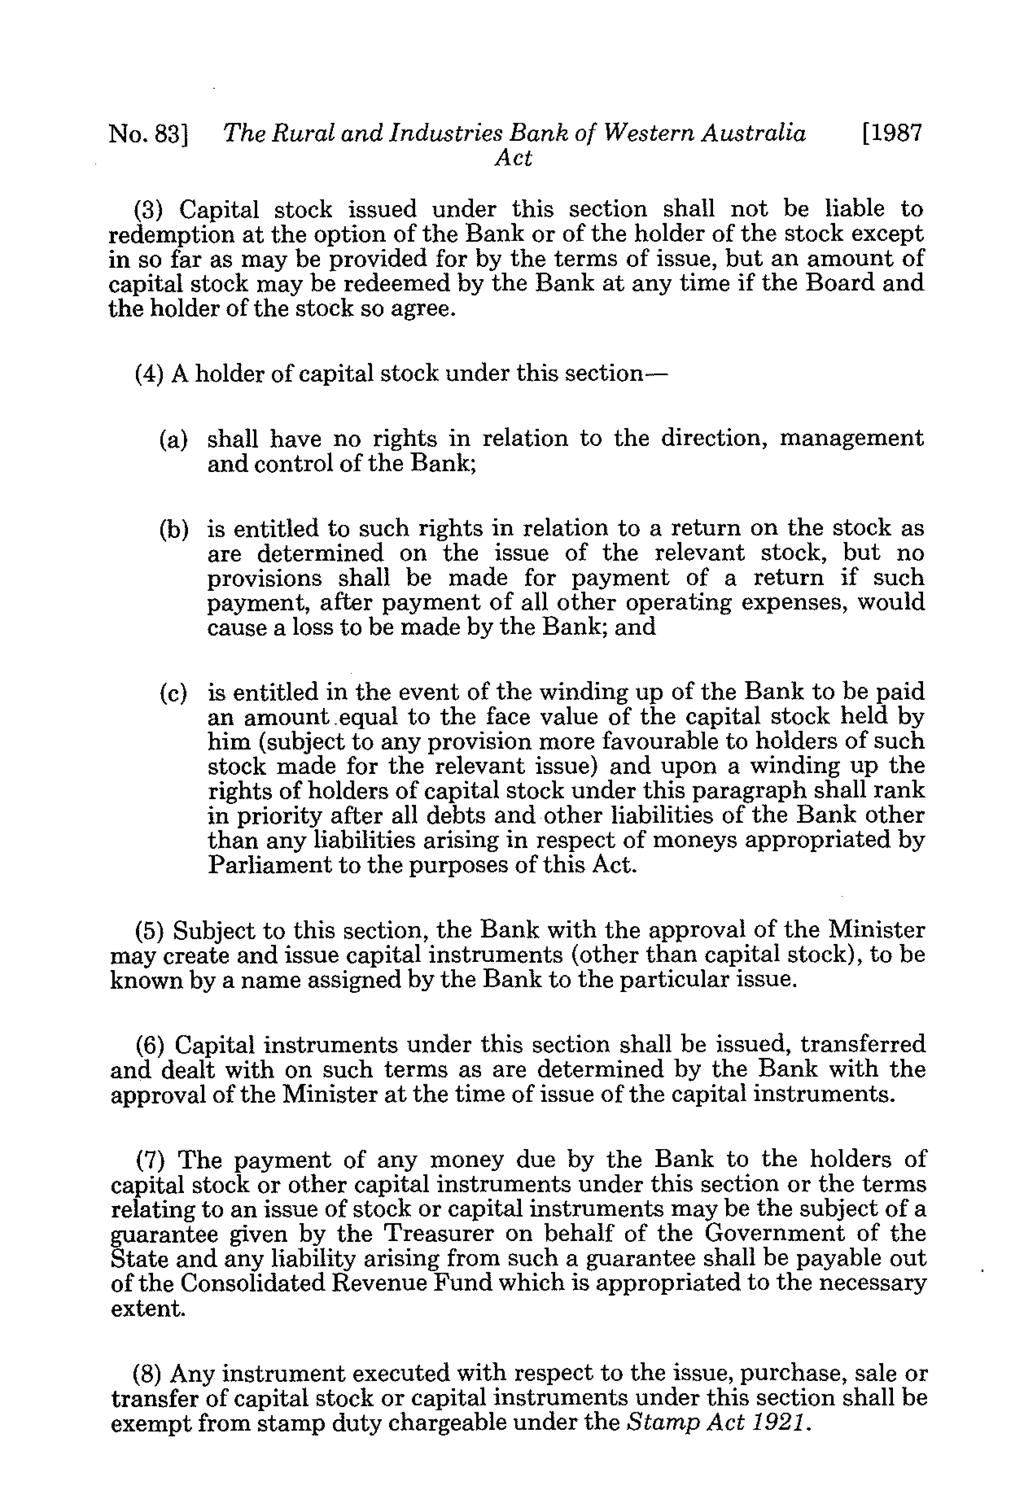 No. 83] The Rural and Industries Bank of Western Australia [1987 (3) Capital stock issued under this section shall not be liable to redemption at the option of the Bank or of the holder of the stock